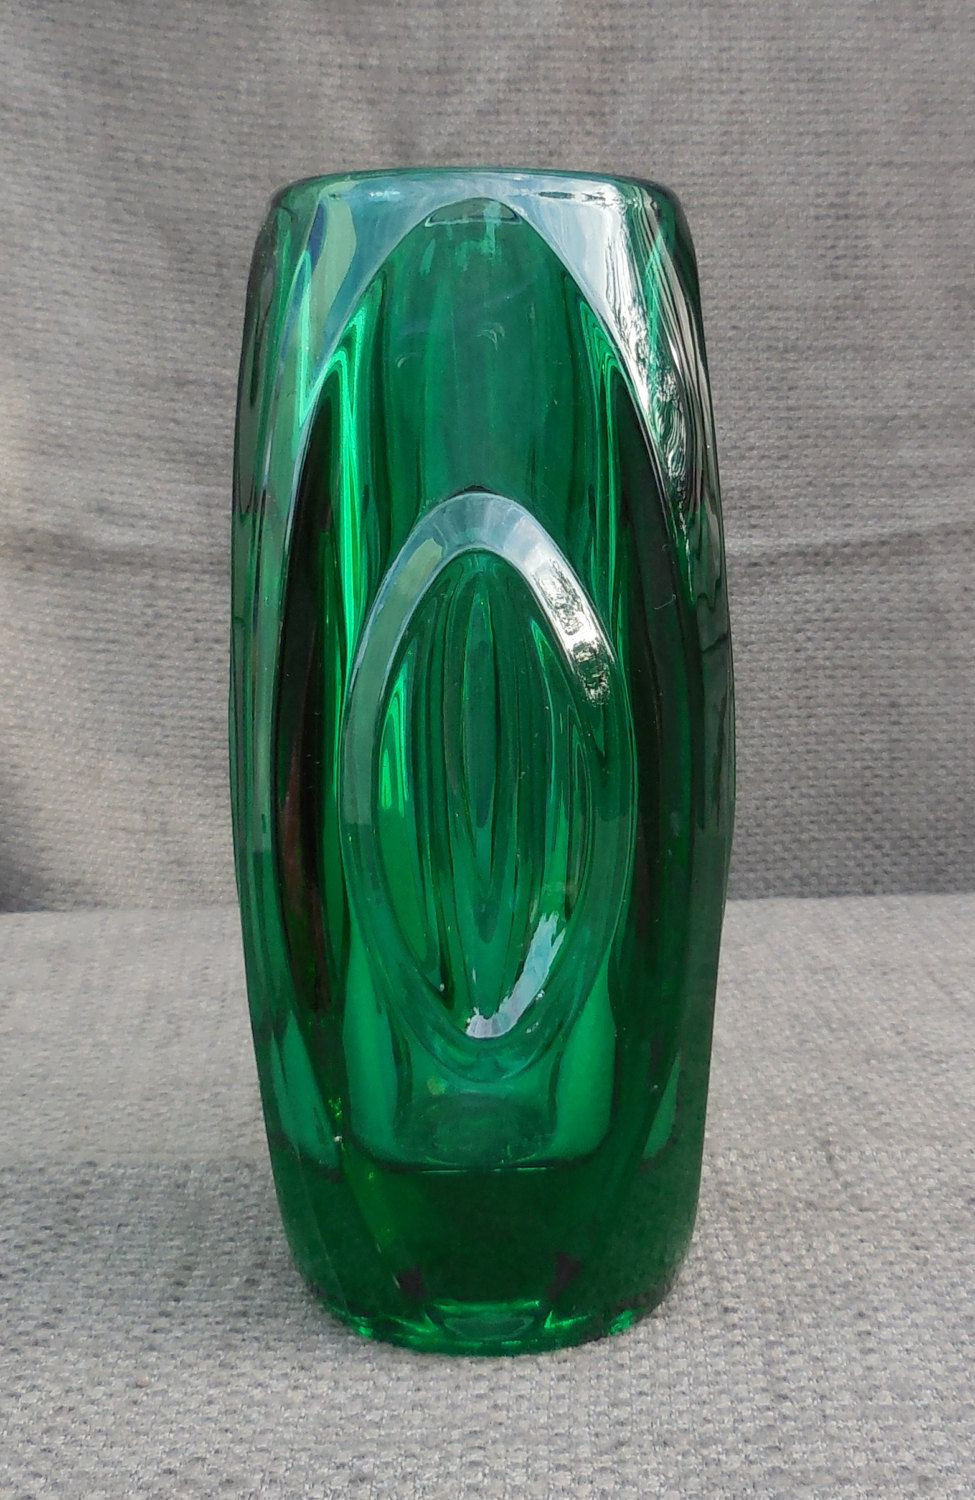 12 Popular Old Vases for Sale 2024 free download old vases for sale of stunning 1950s vintage rosice czech lens green art glass vase by intended for stunning 1950s vintage rosice czech lens green art glass vase by rudolph schrotter